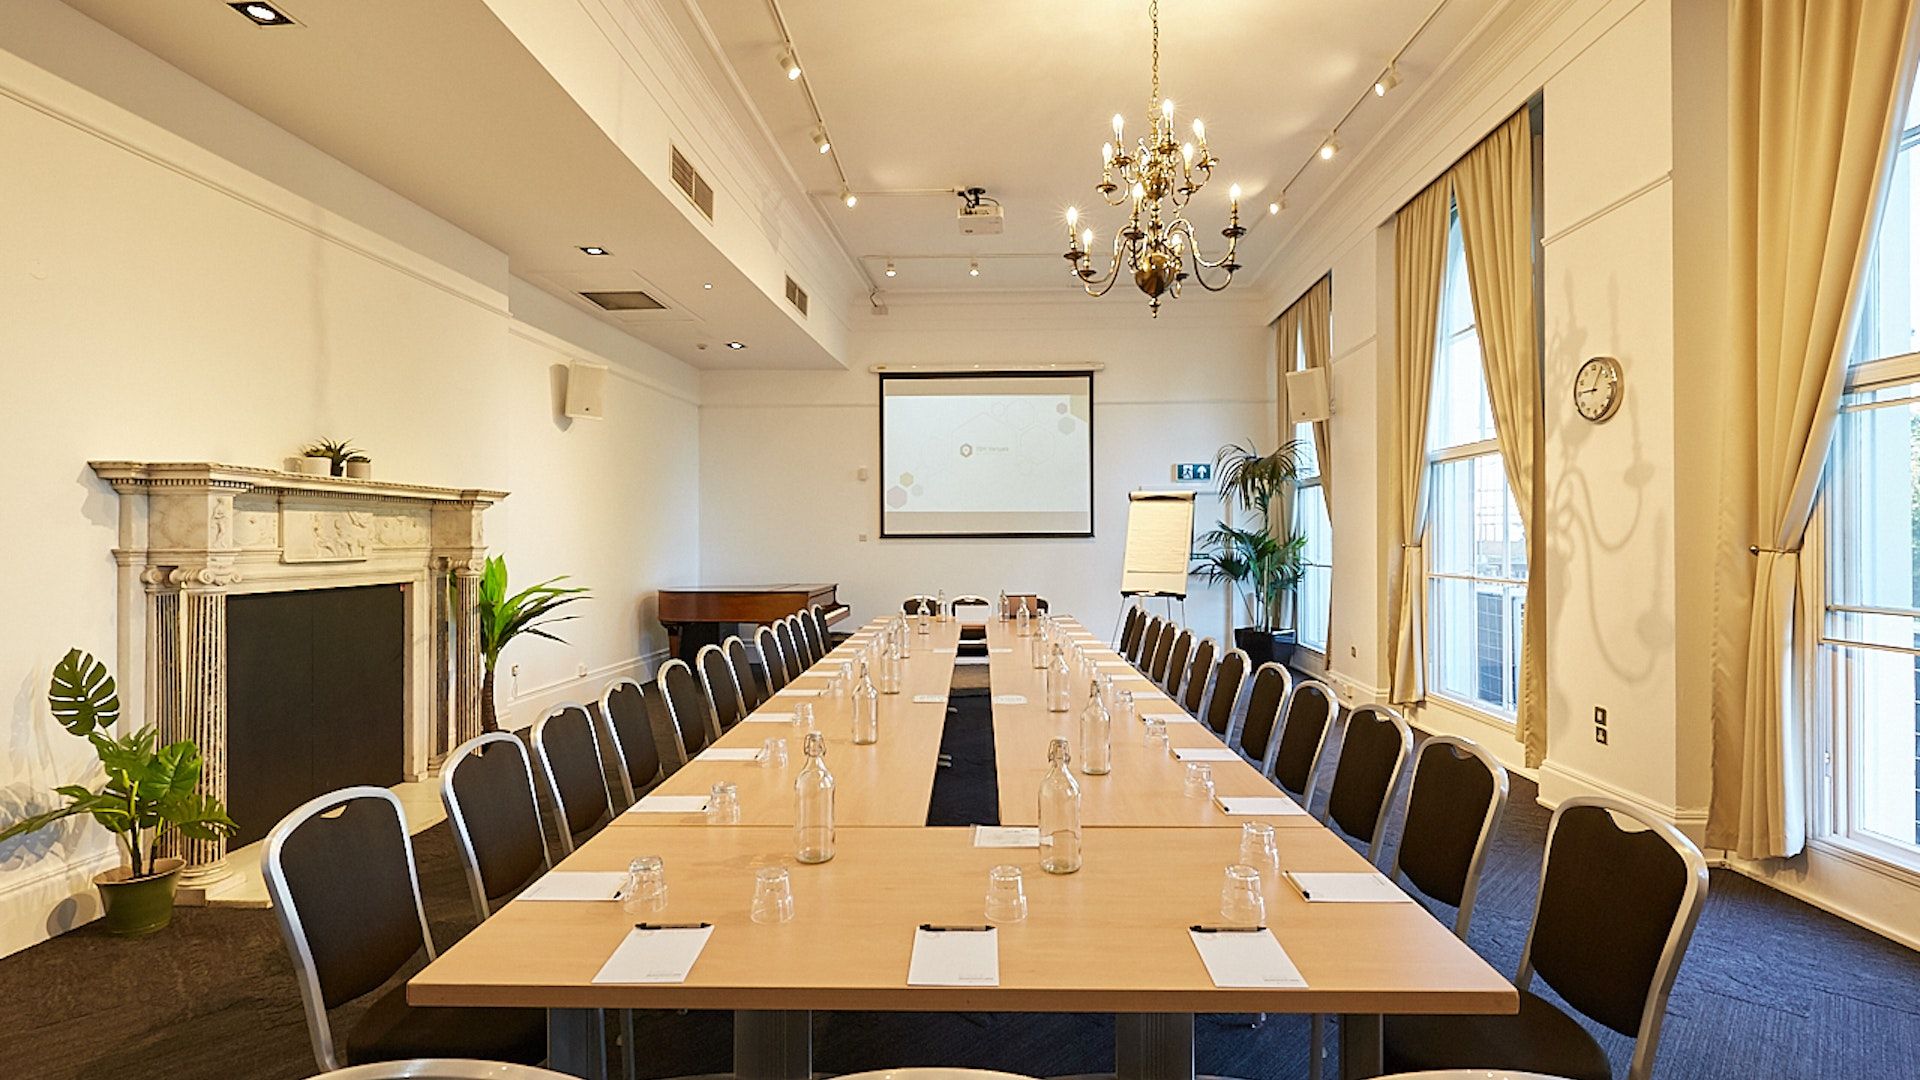 5 Quirky London Meeting Rooms to Inspire Creative Thinking